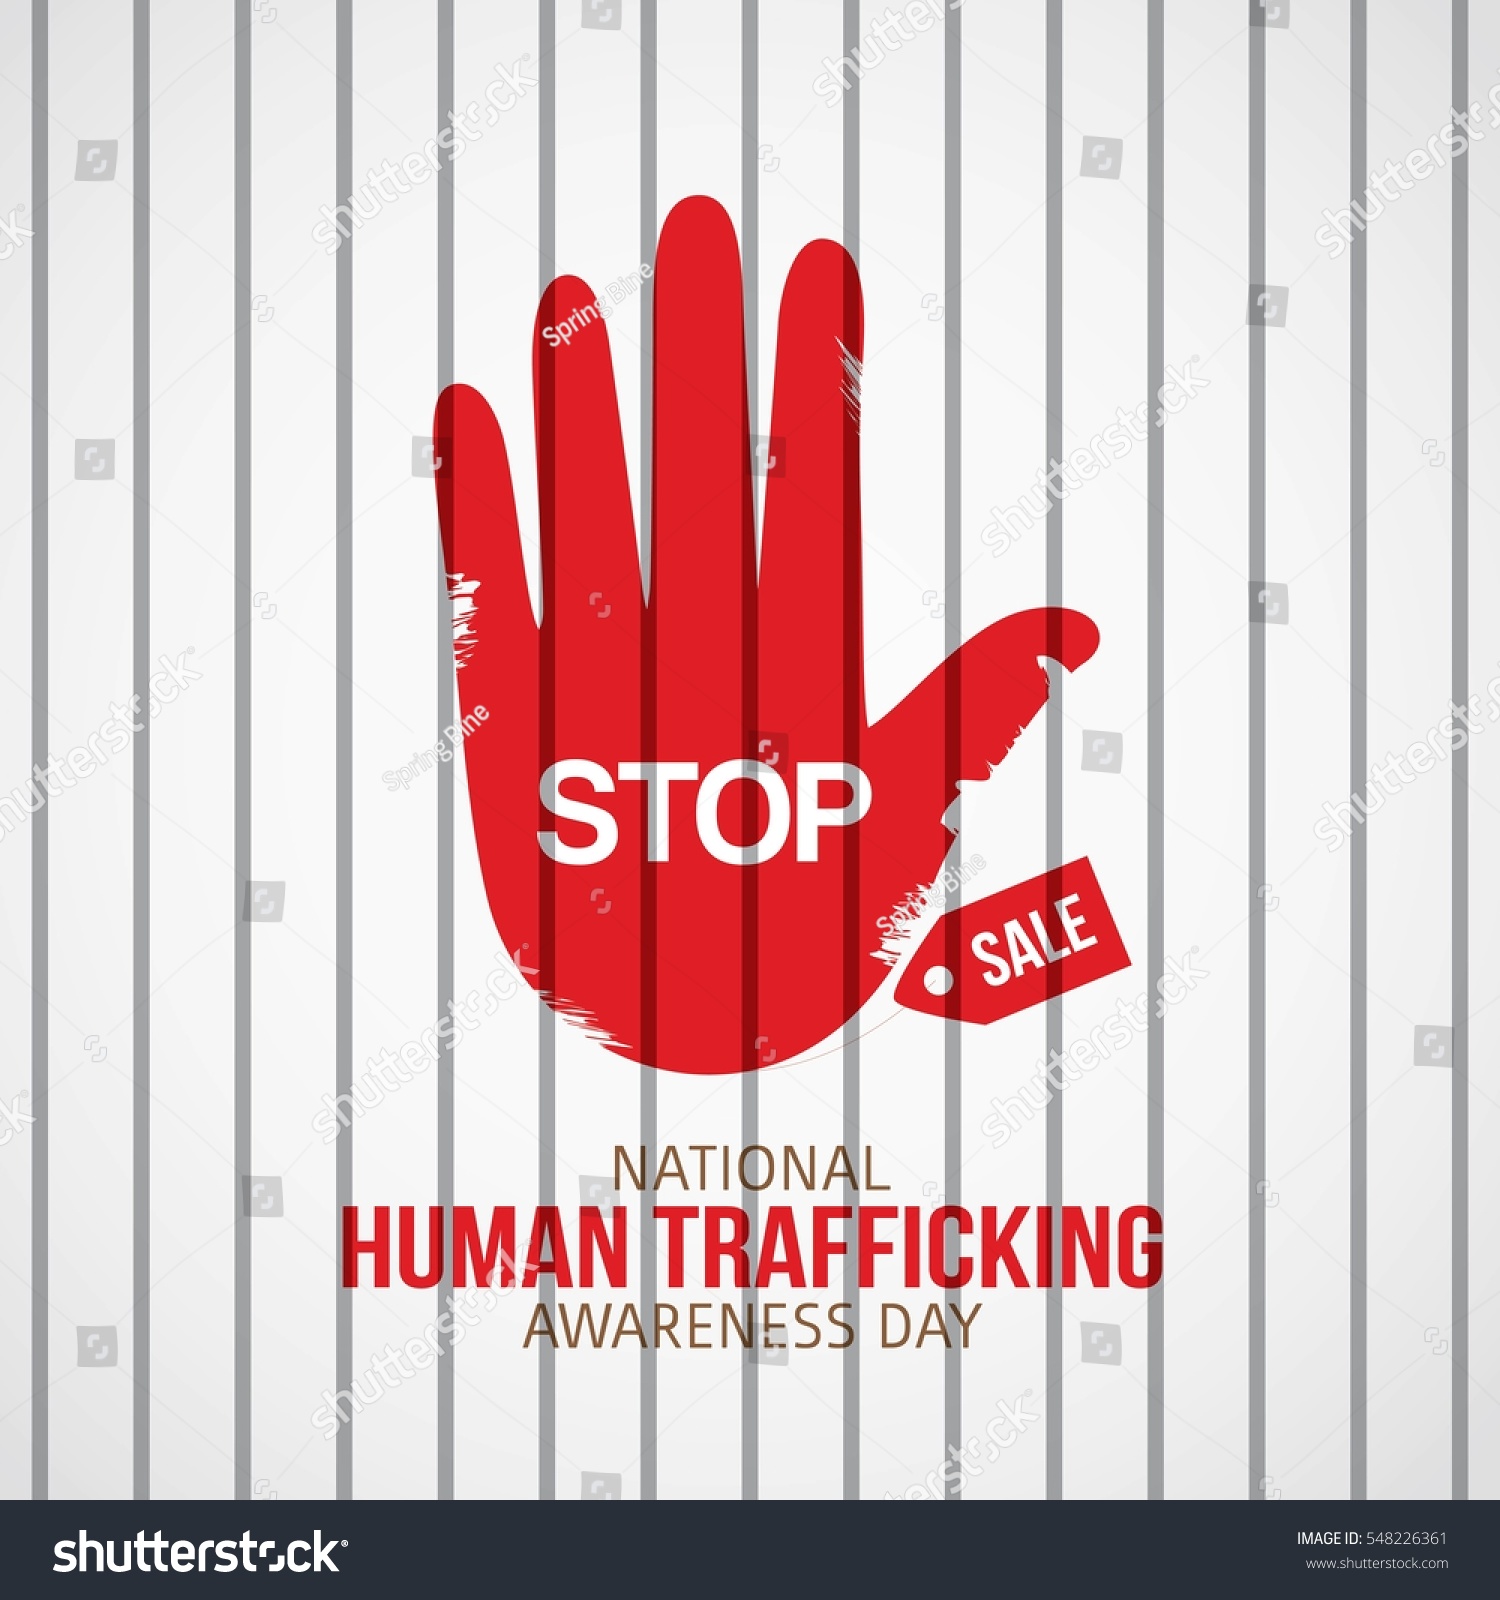 National Human Trafficking Awareness Day Vector Stock Vector Royalty Free 548226361 Shutterstock 2582